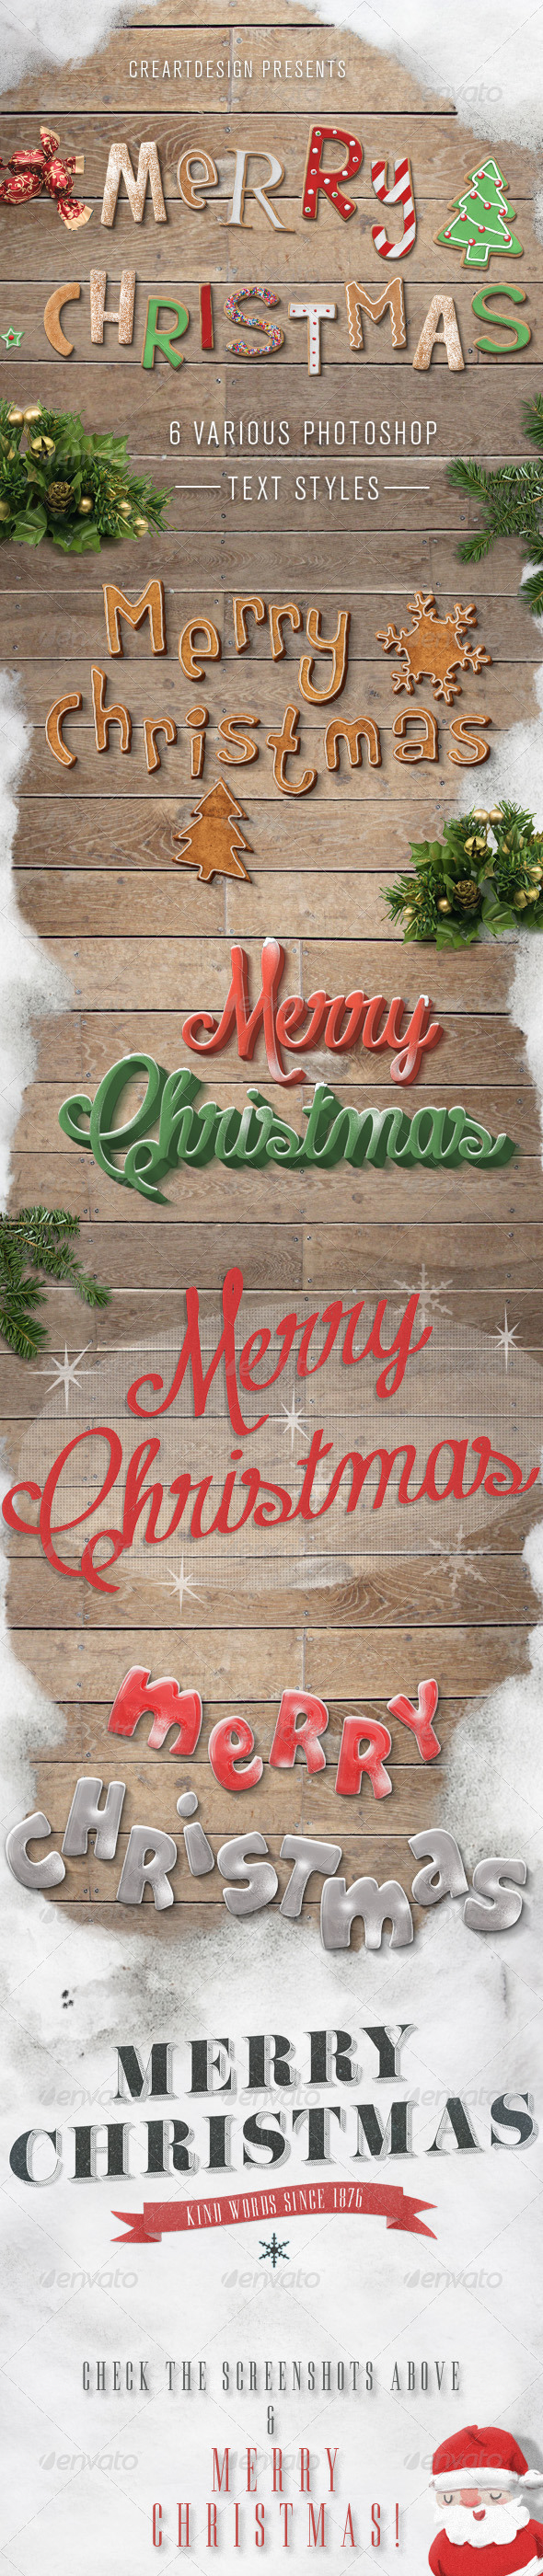 Christmas Text Effects And Styles